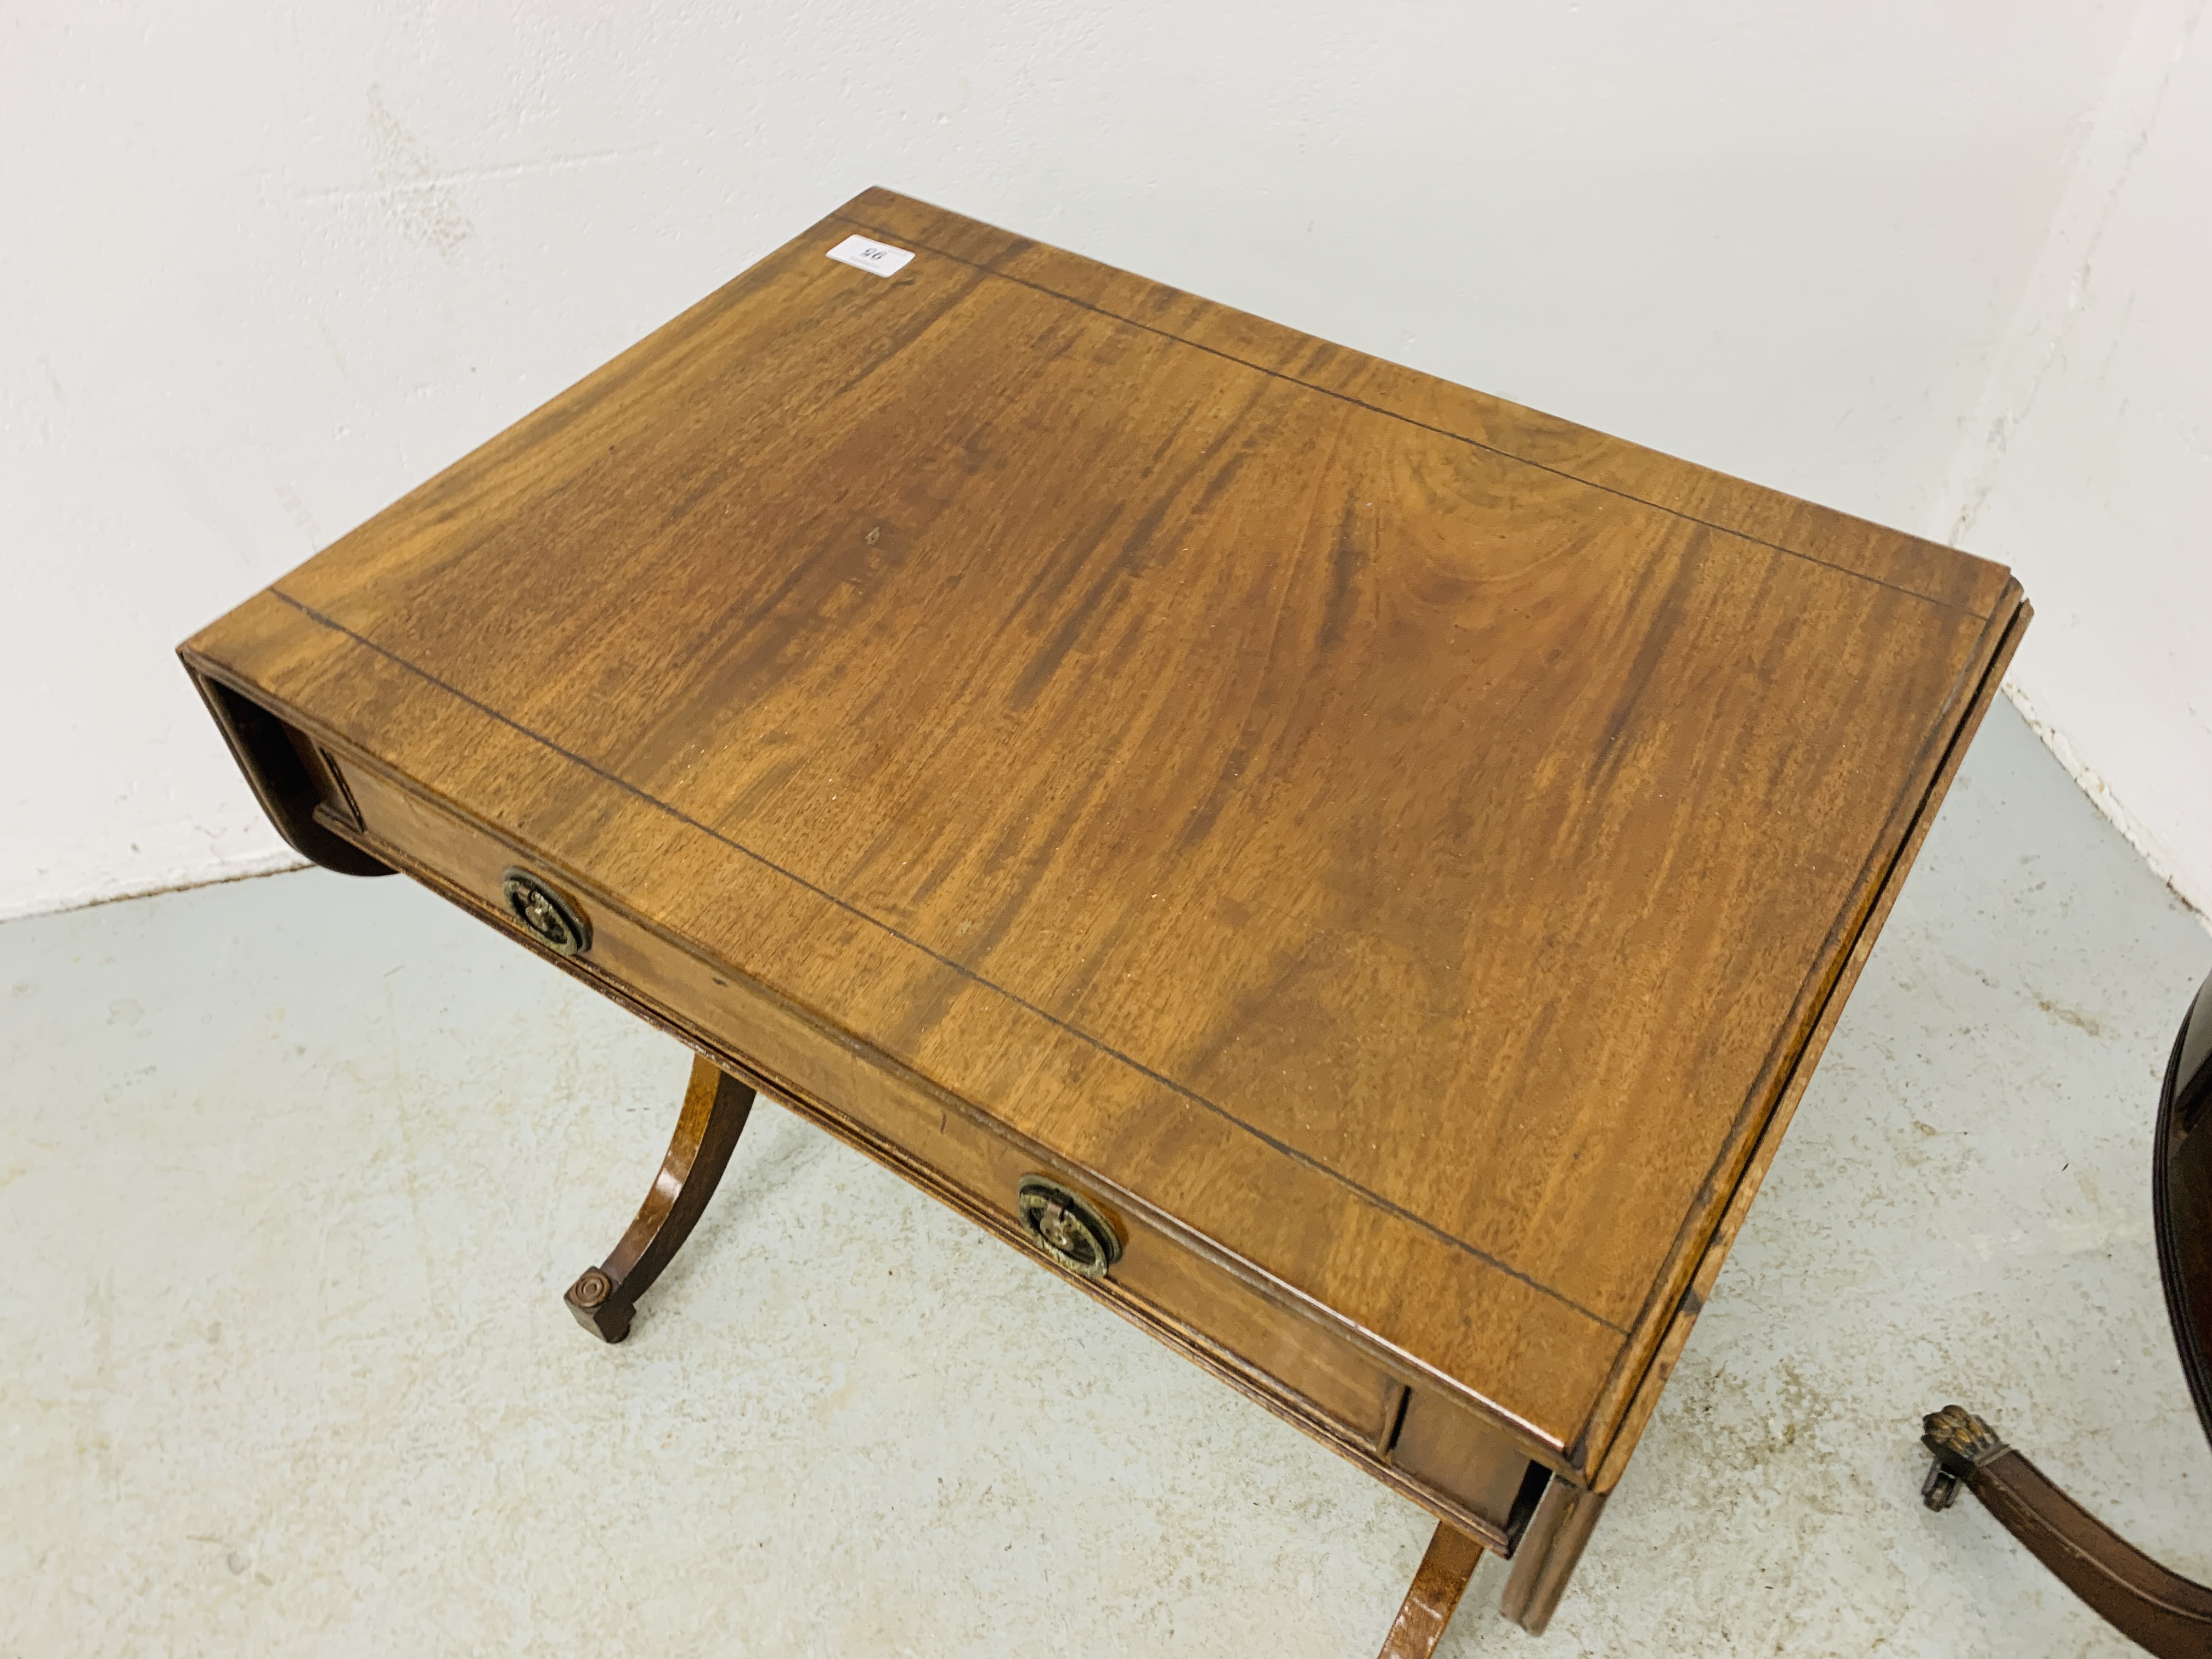 A REPRODUCTION DROP FLAP SINGLE DRAWER OCCASIONAL TABLE AND REPRODUCTION MAHOGANY FINISH PEDESTAL - Image 4 of 9